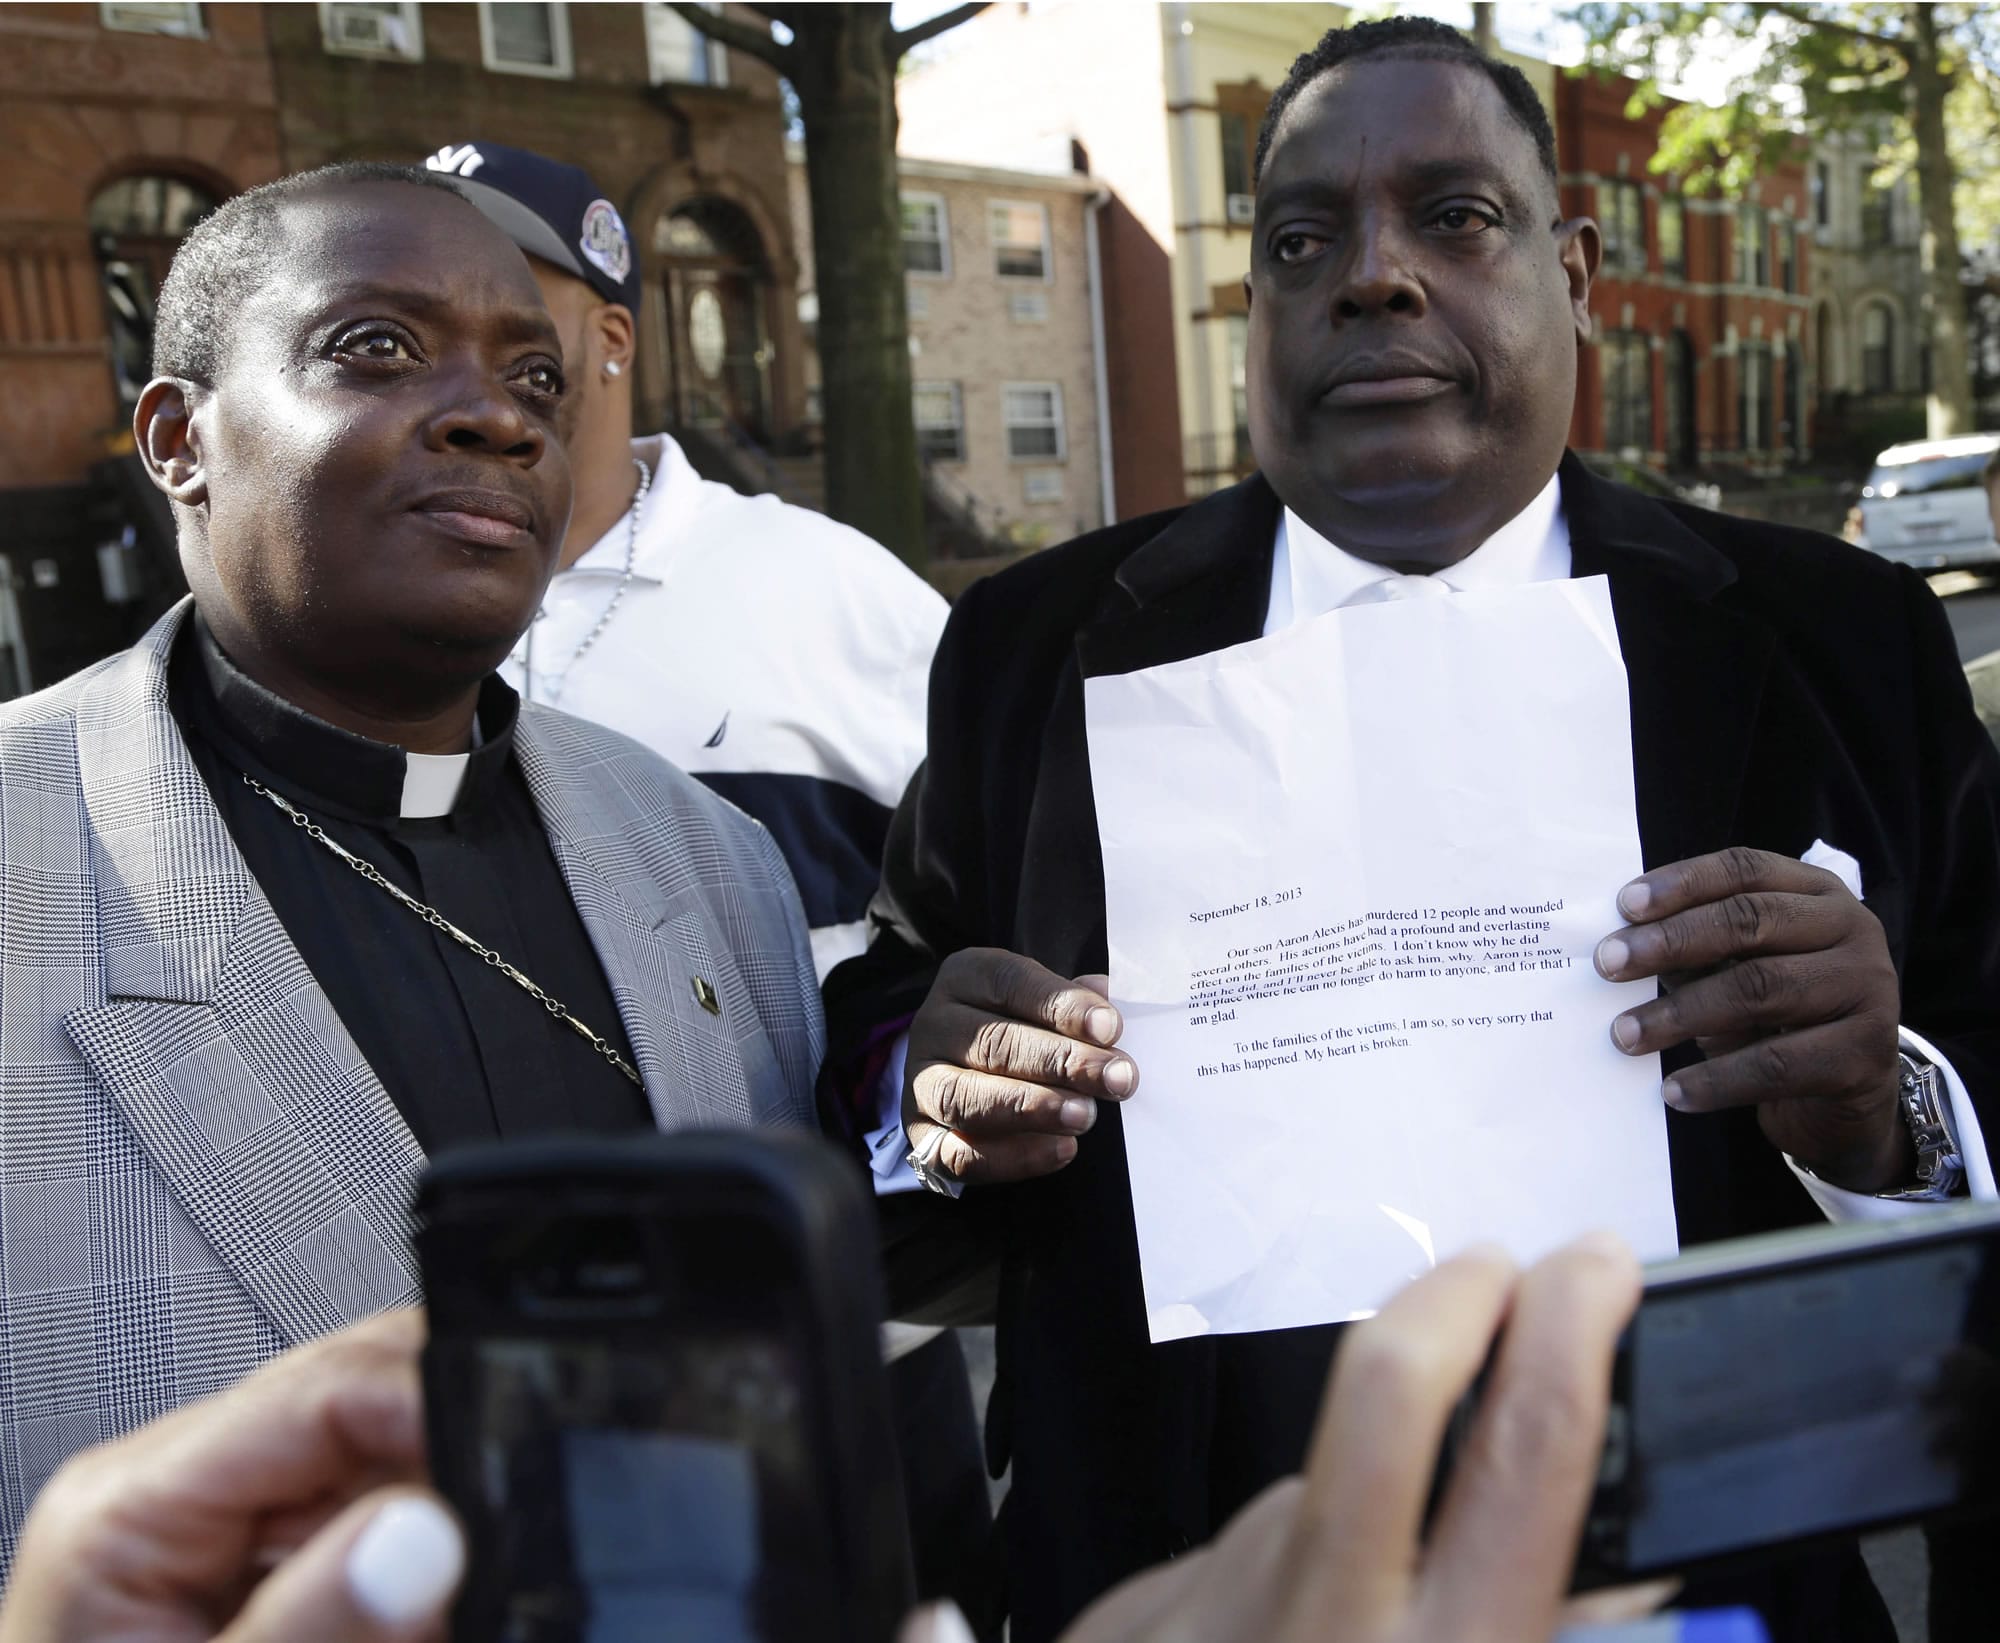 While reporters take pictures, Bishop Gerald Seabrooks, right, holds up a copy of a statement made by Cathleen Alexis, mother of suspected Navy Yard shooter Aaron Alexis, as Bishop Willie Billips looks on in Brooklyn, N.Y., on Wednesday